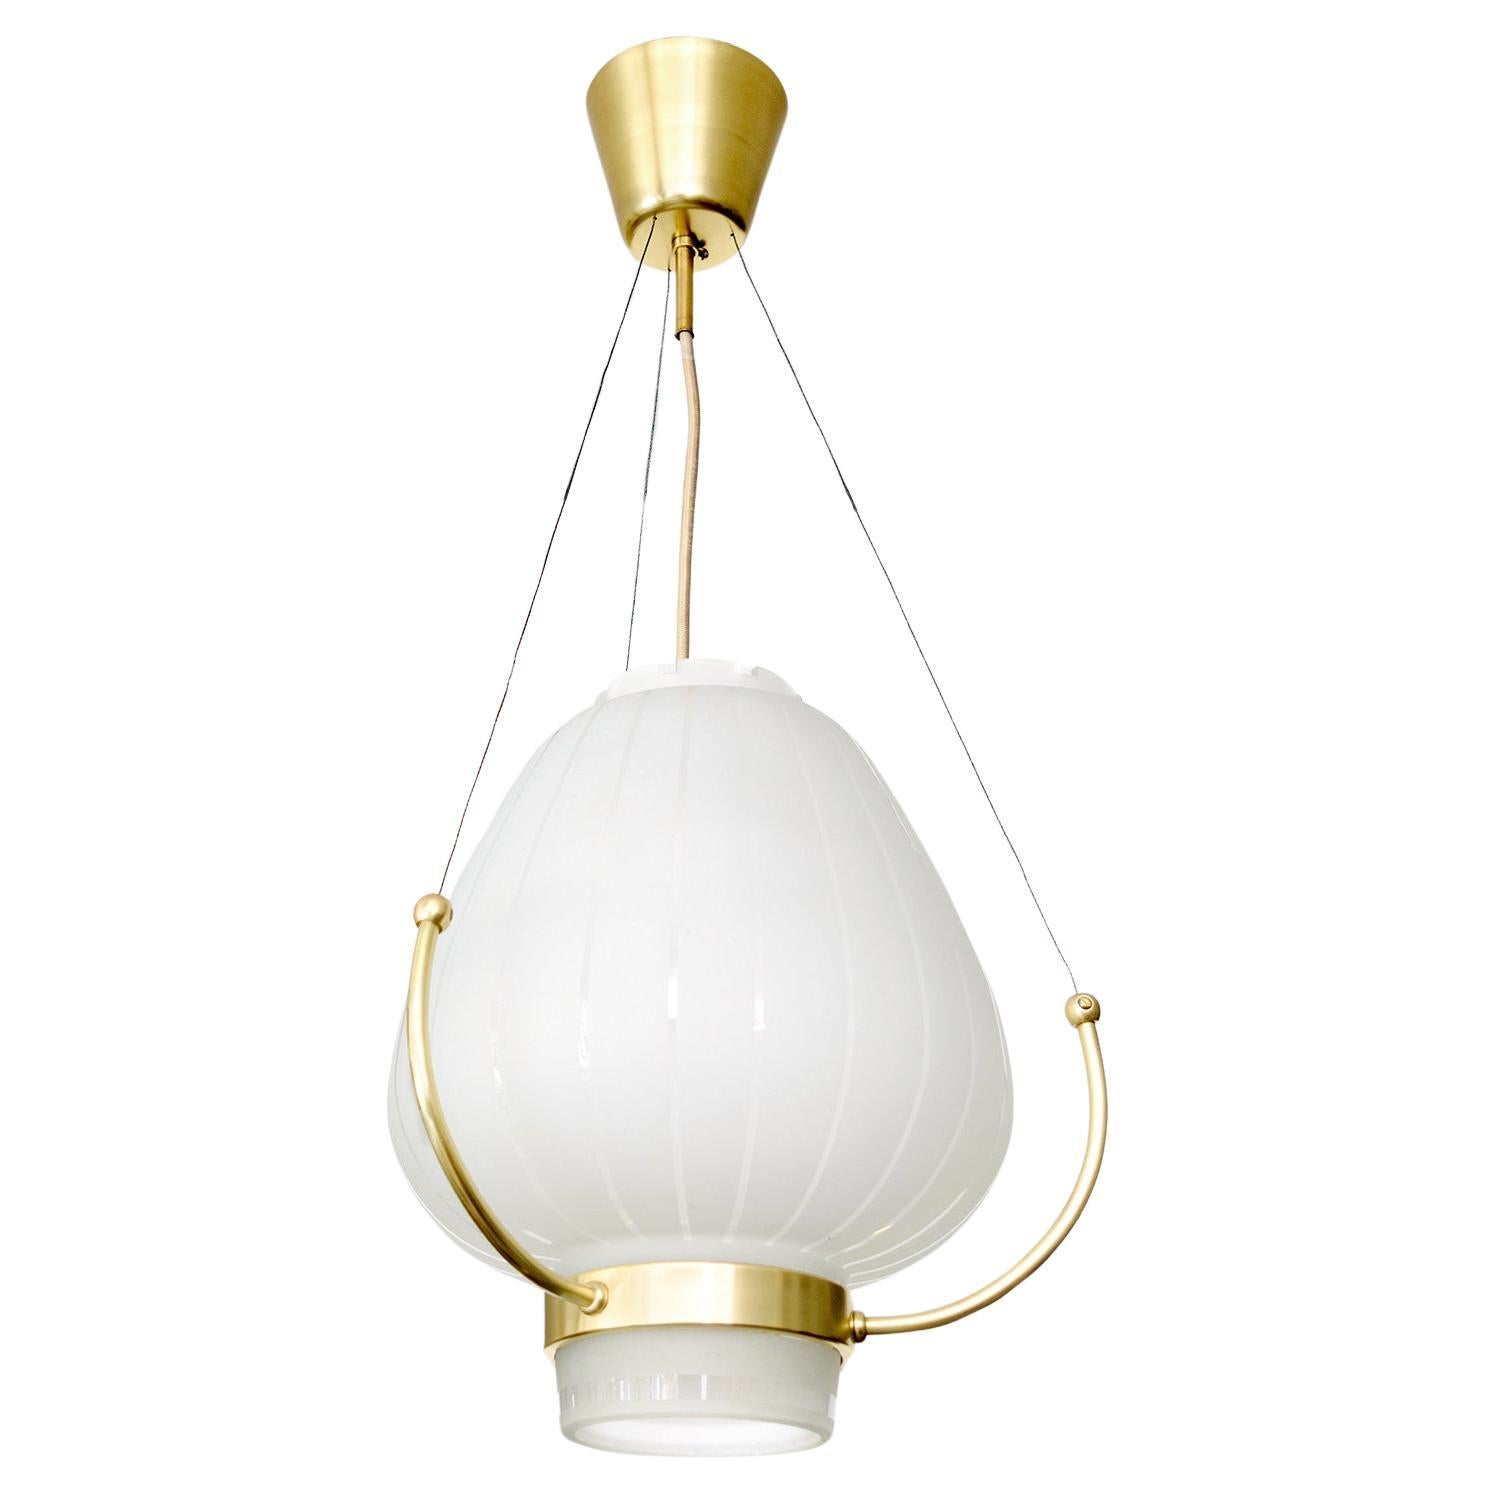 Orrefors Pendant with polished and acid etched shade on a brass frame.